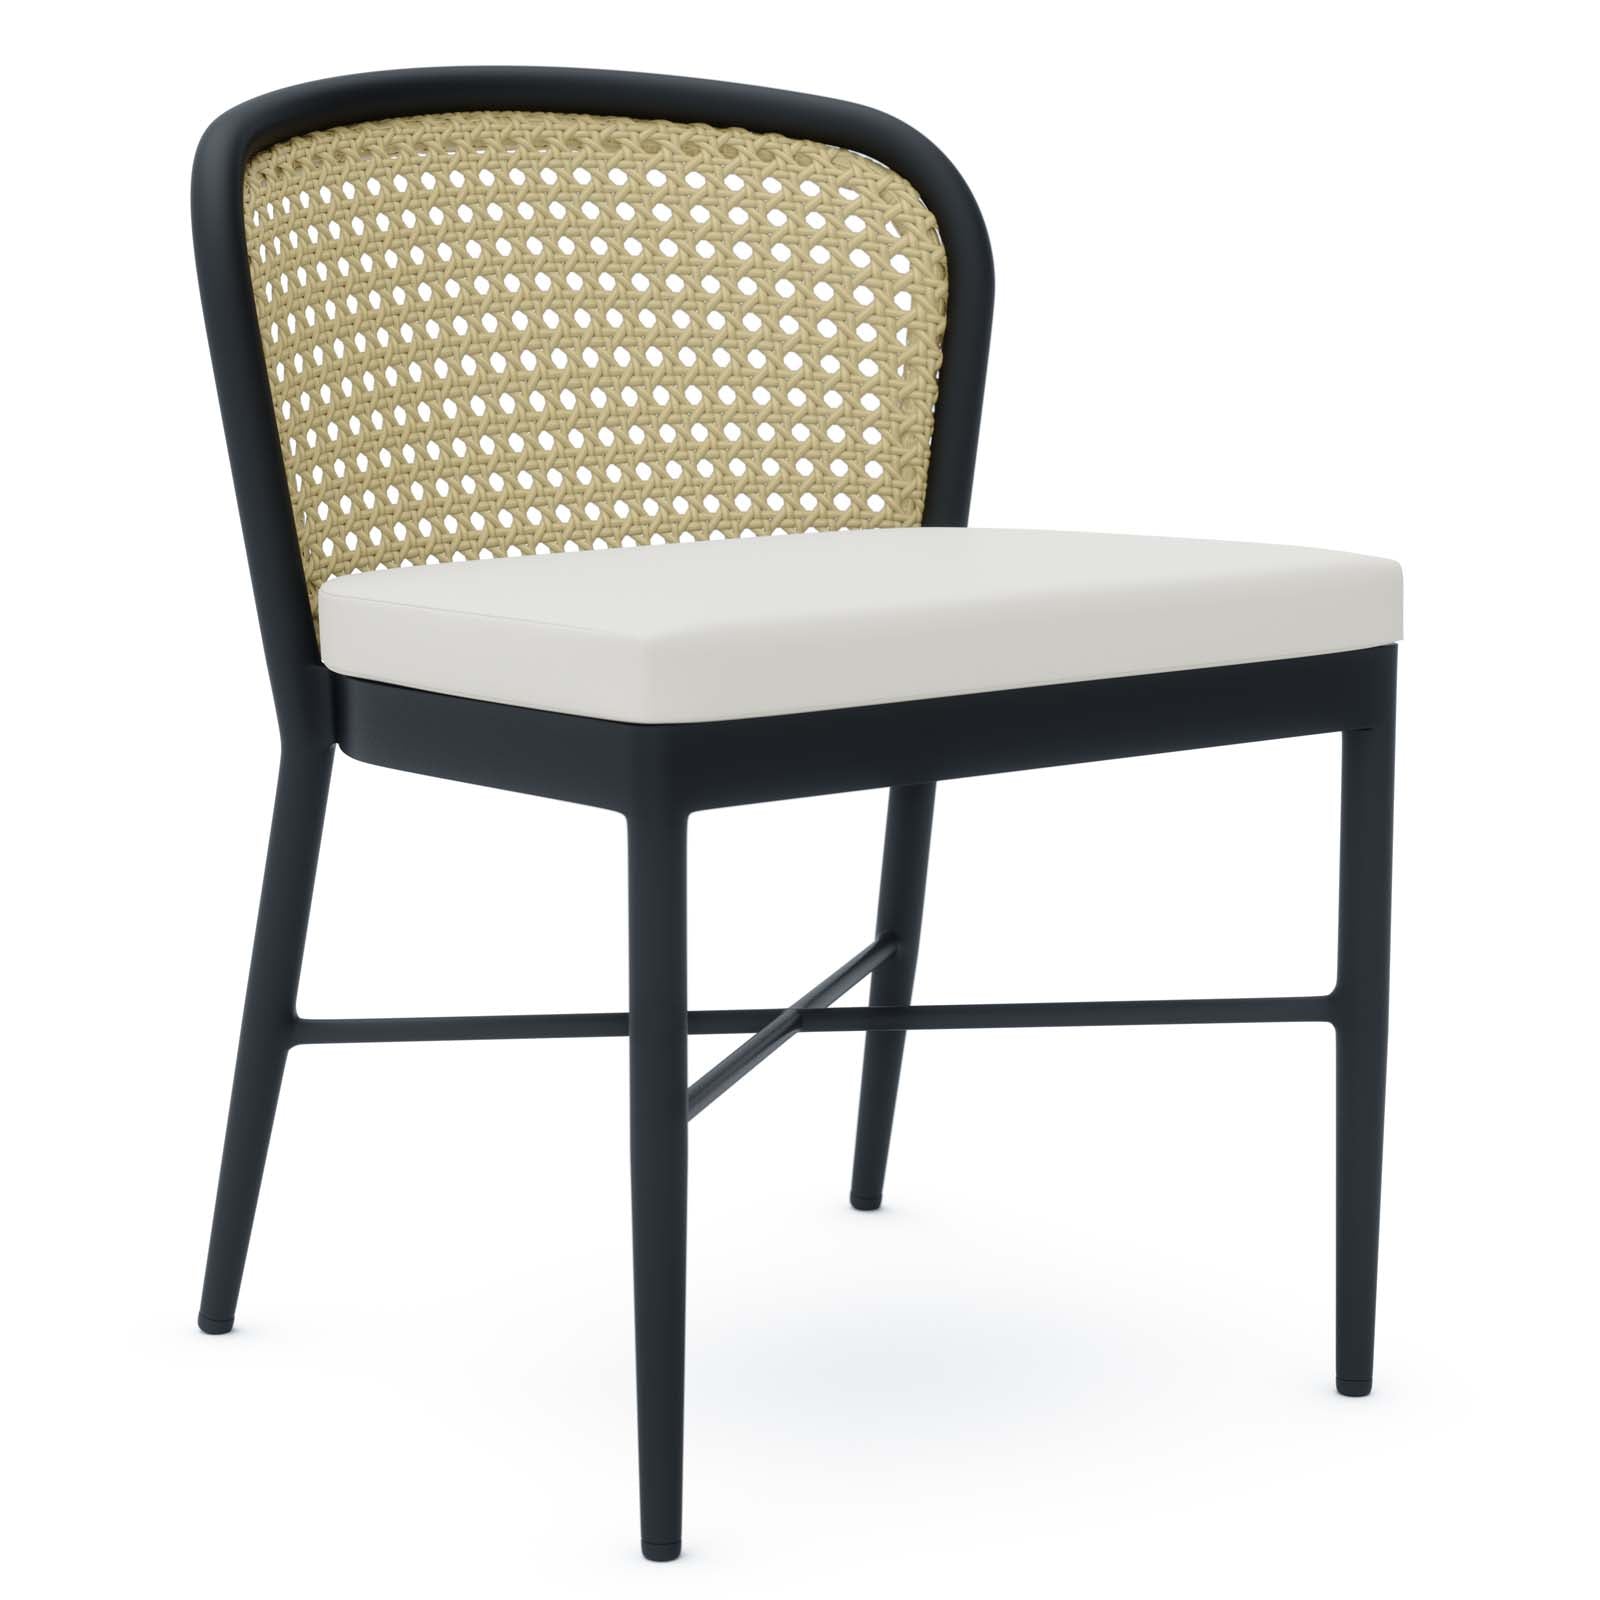 Melbourne Outdoor Patio Dining Side Chair - East Shore Modern Home Furnishings